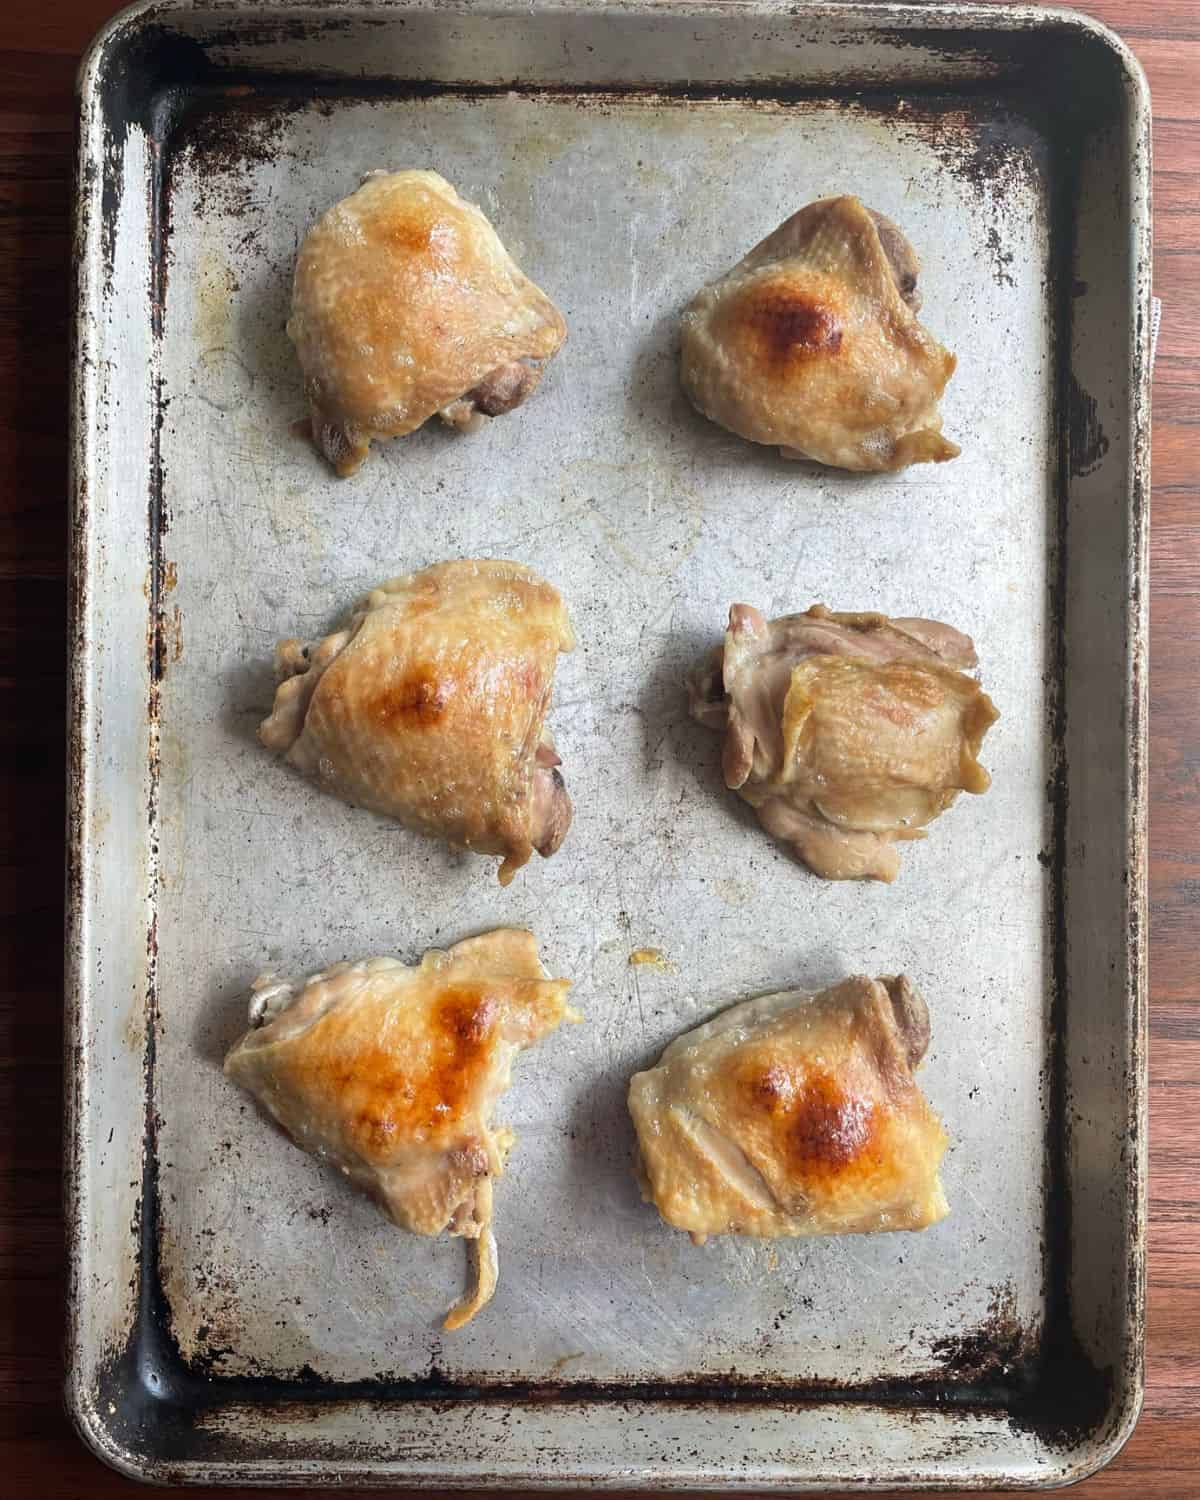 Boiled chicken thighs on a sheet pan that have been broiled until the skin turns golden brown.